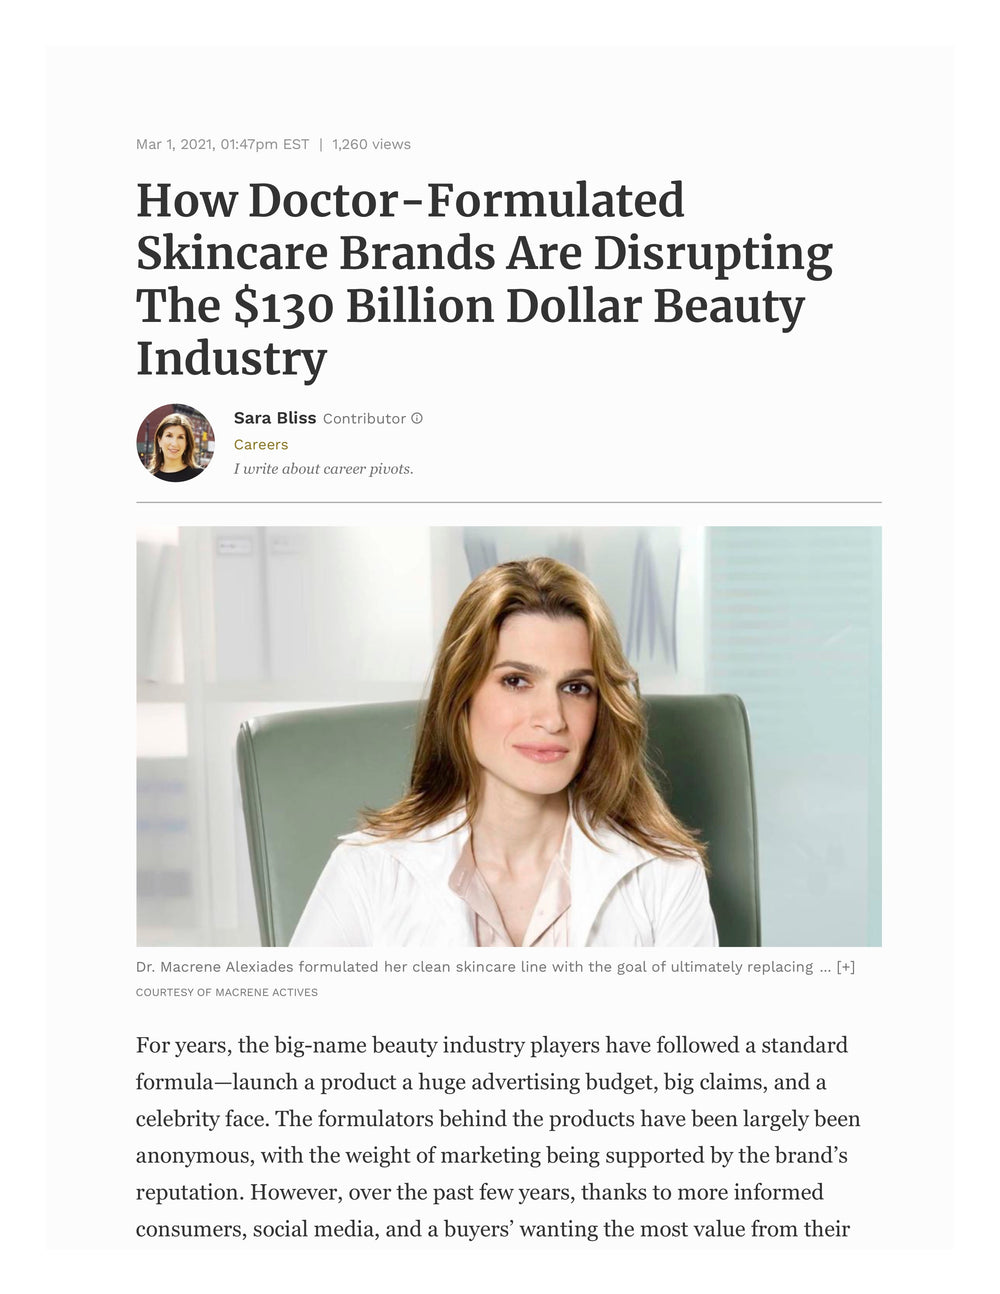 Forbes: How Doctor-Formulated Skincare Brands Are Disrupting The $130 Billion Dollar Beauty Industry